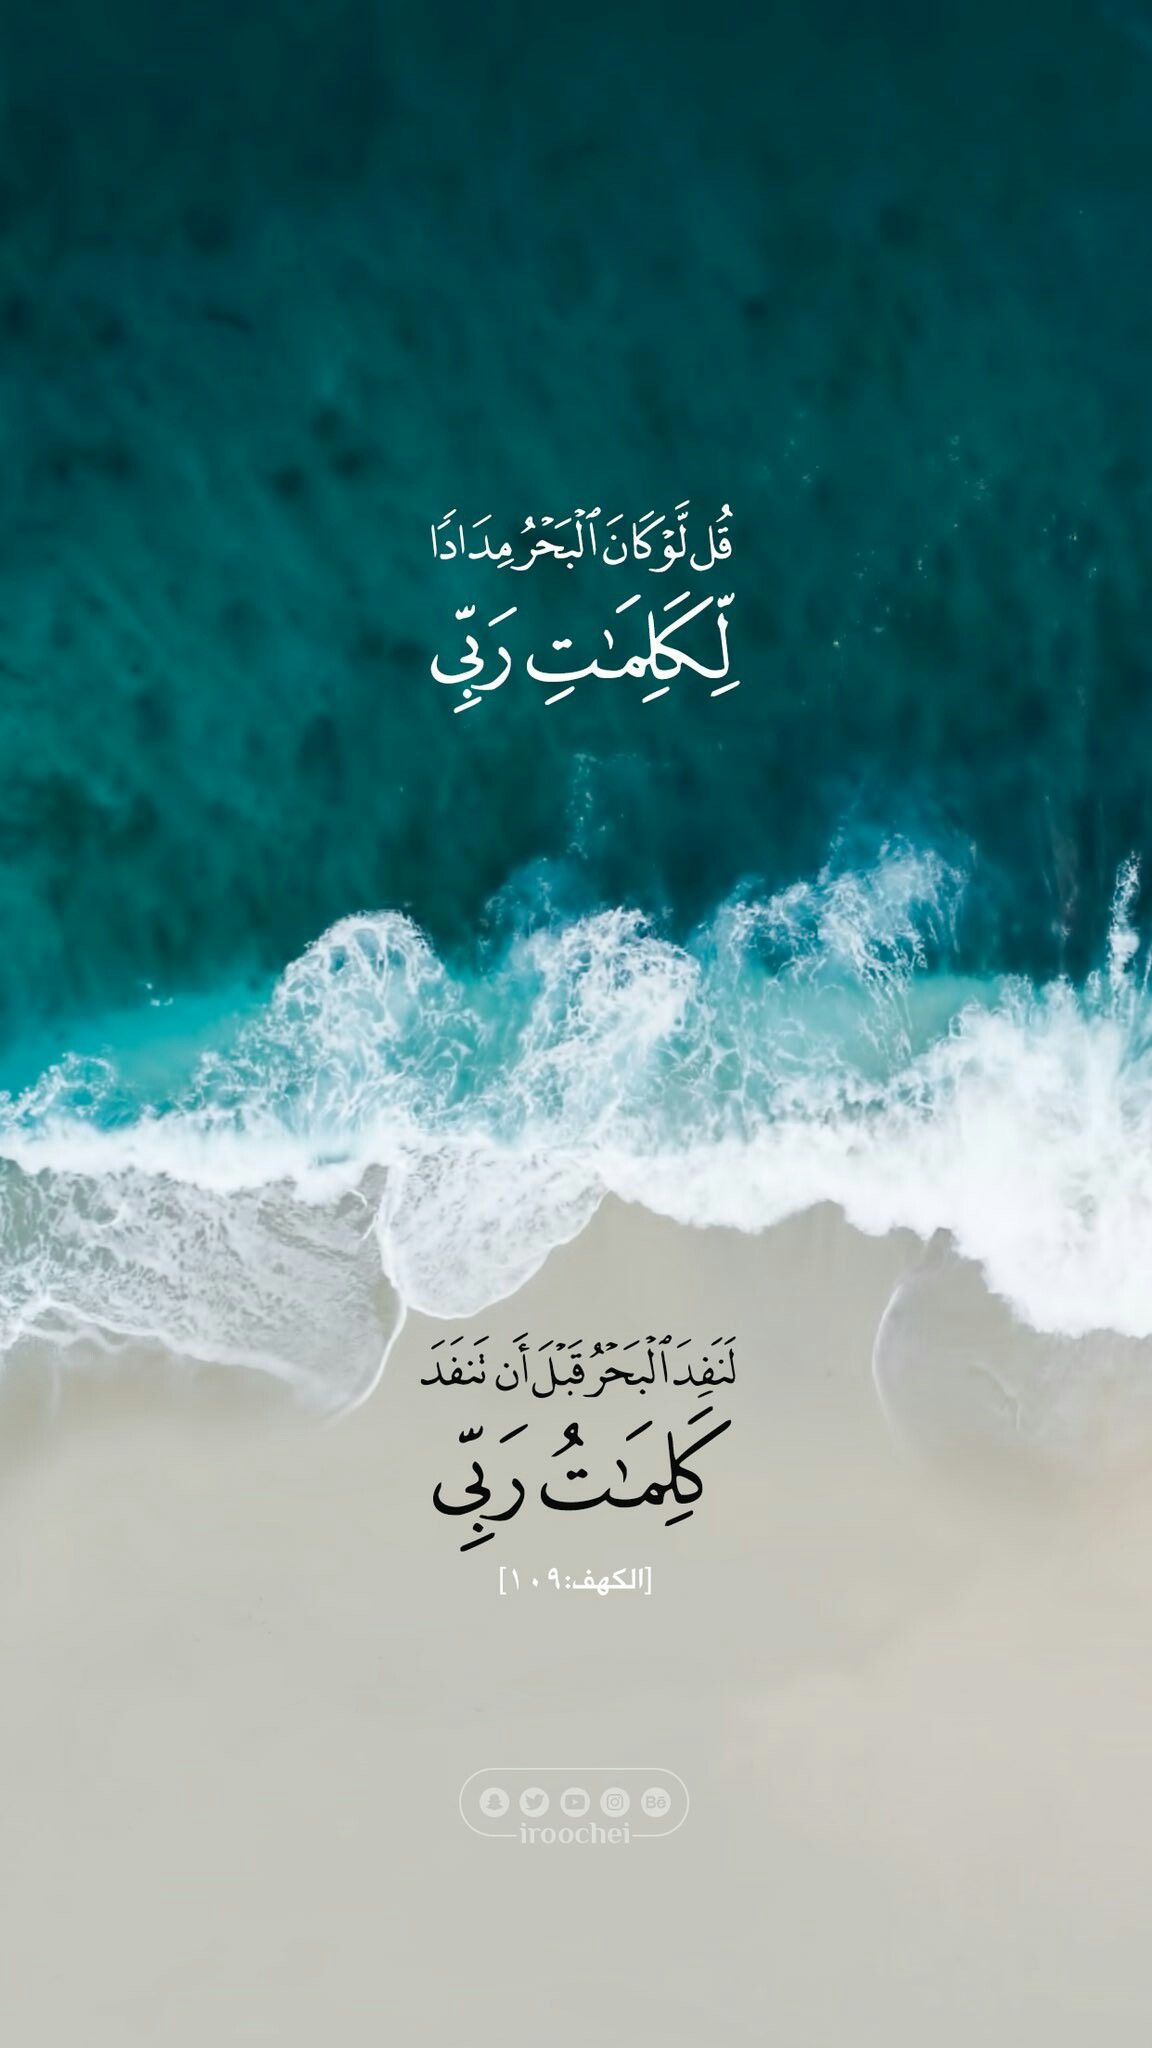 islamic wallpaper iphone,text,font,turquoise,sky,wave